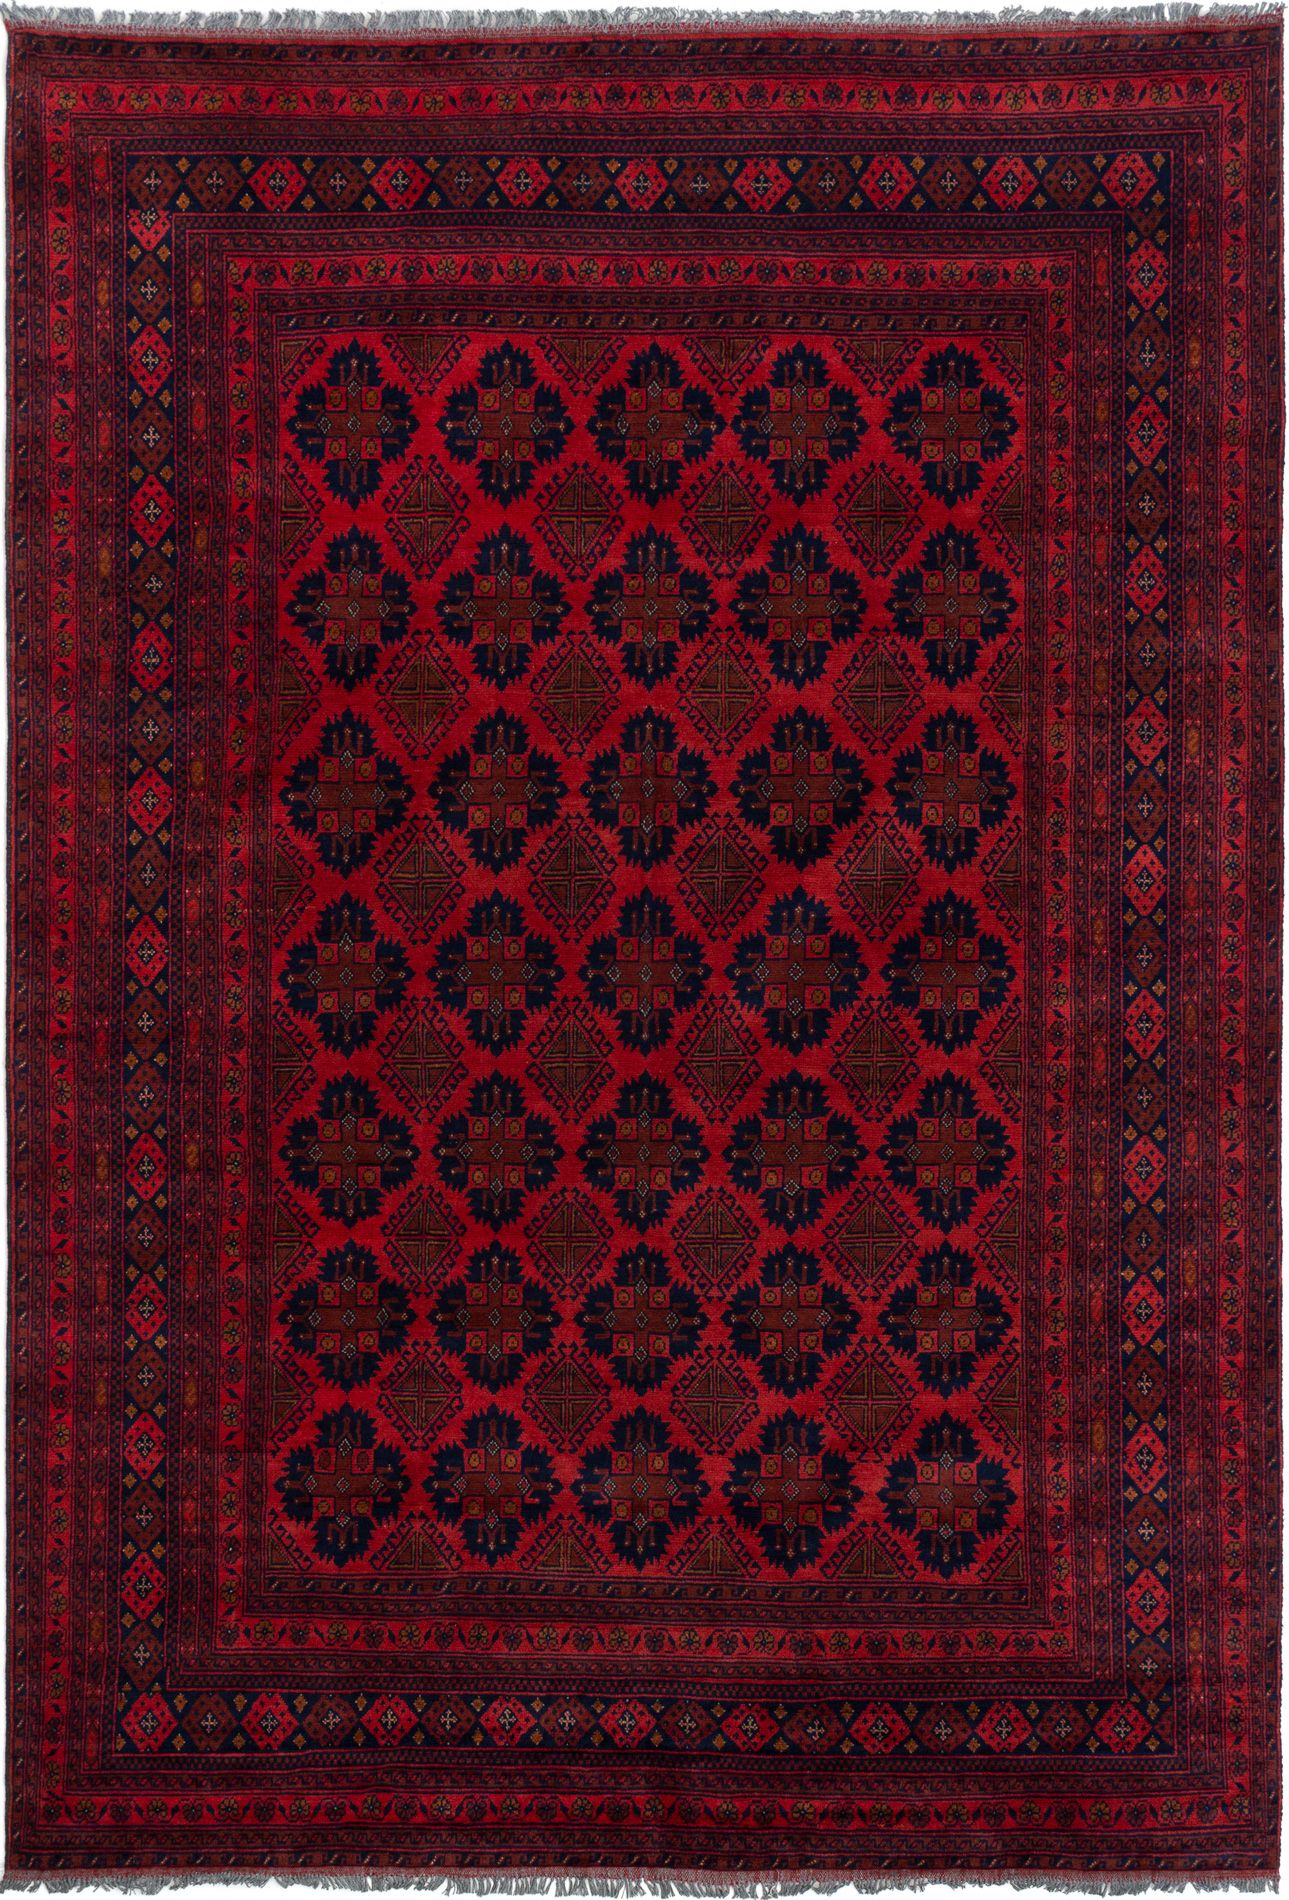 Hand-knotted Finest Khal Mohammadi Red Wool Rug 6'11" x 9'6"  Size: 6'11" x 9'6"  